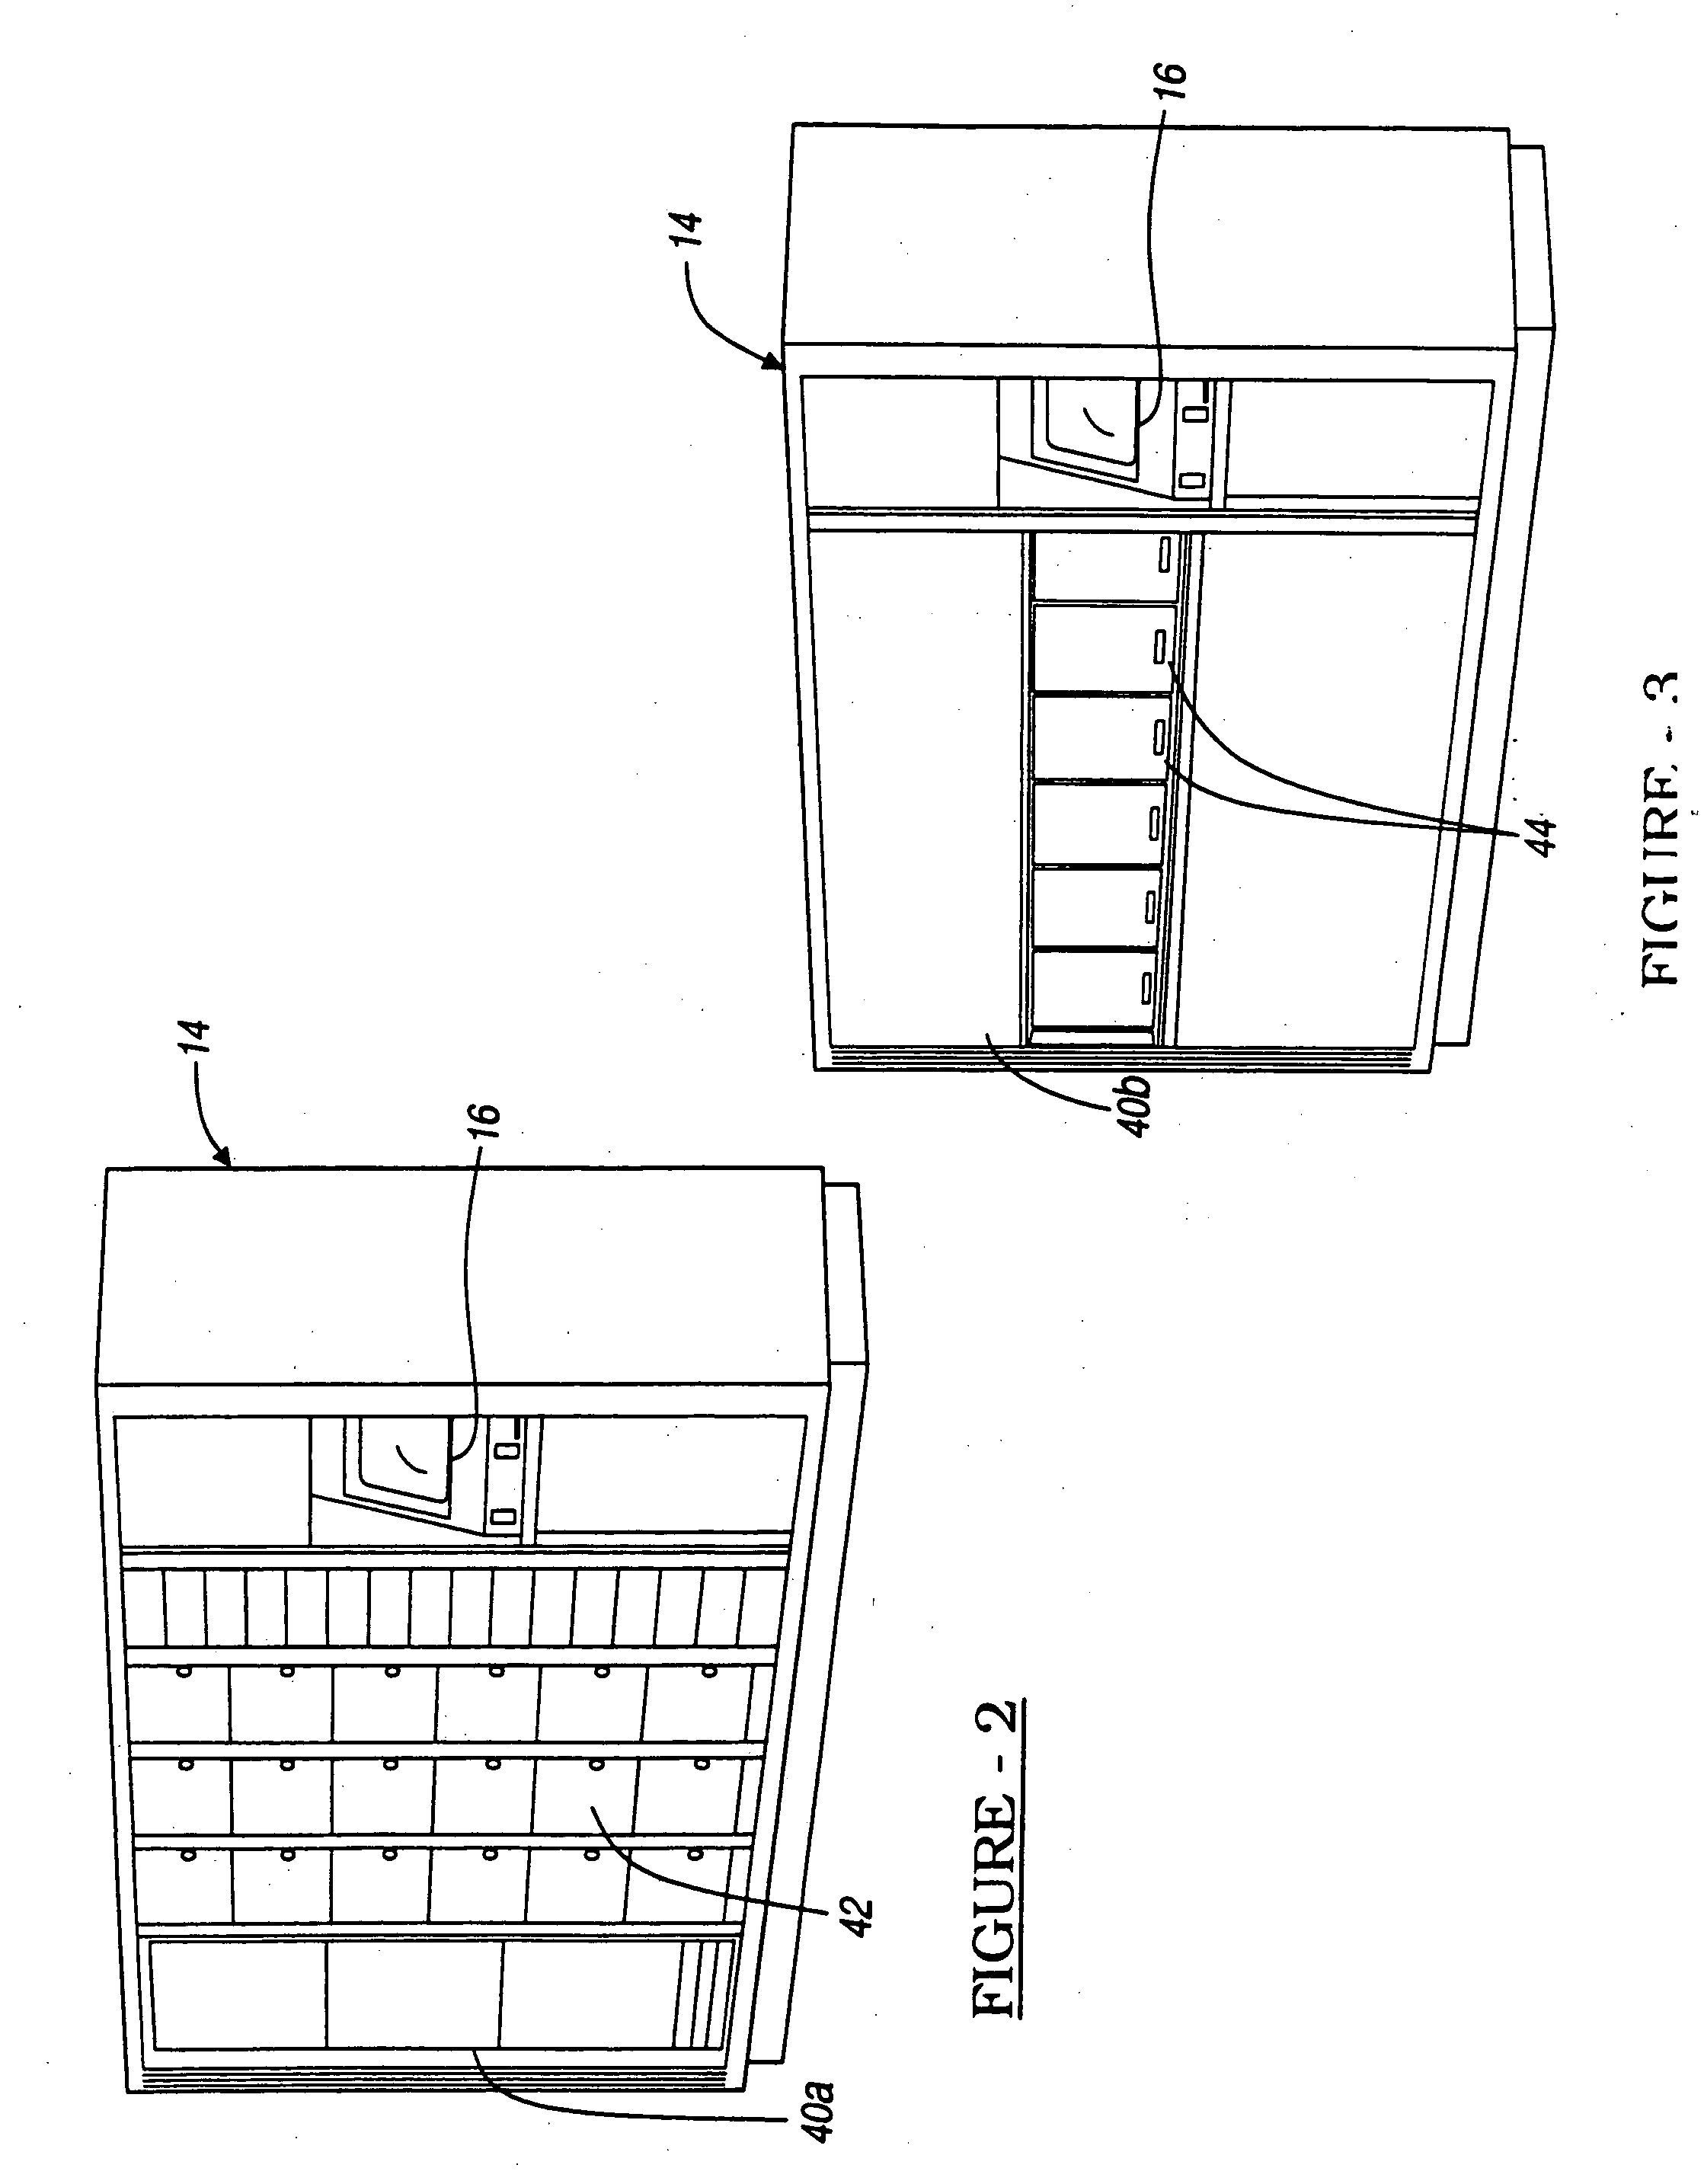 System and method for automated package pick-up and delivery